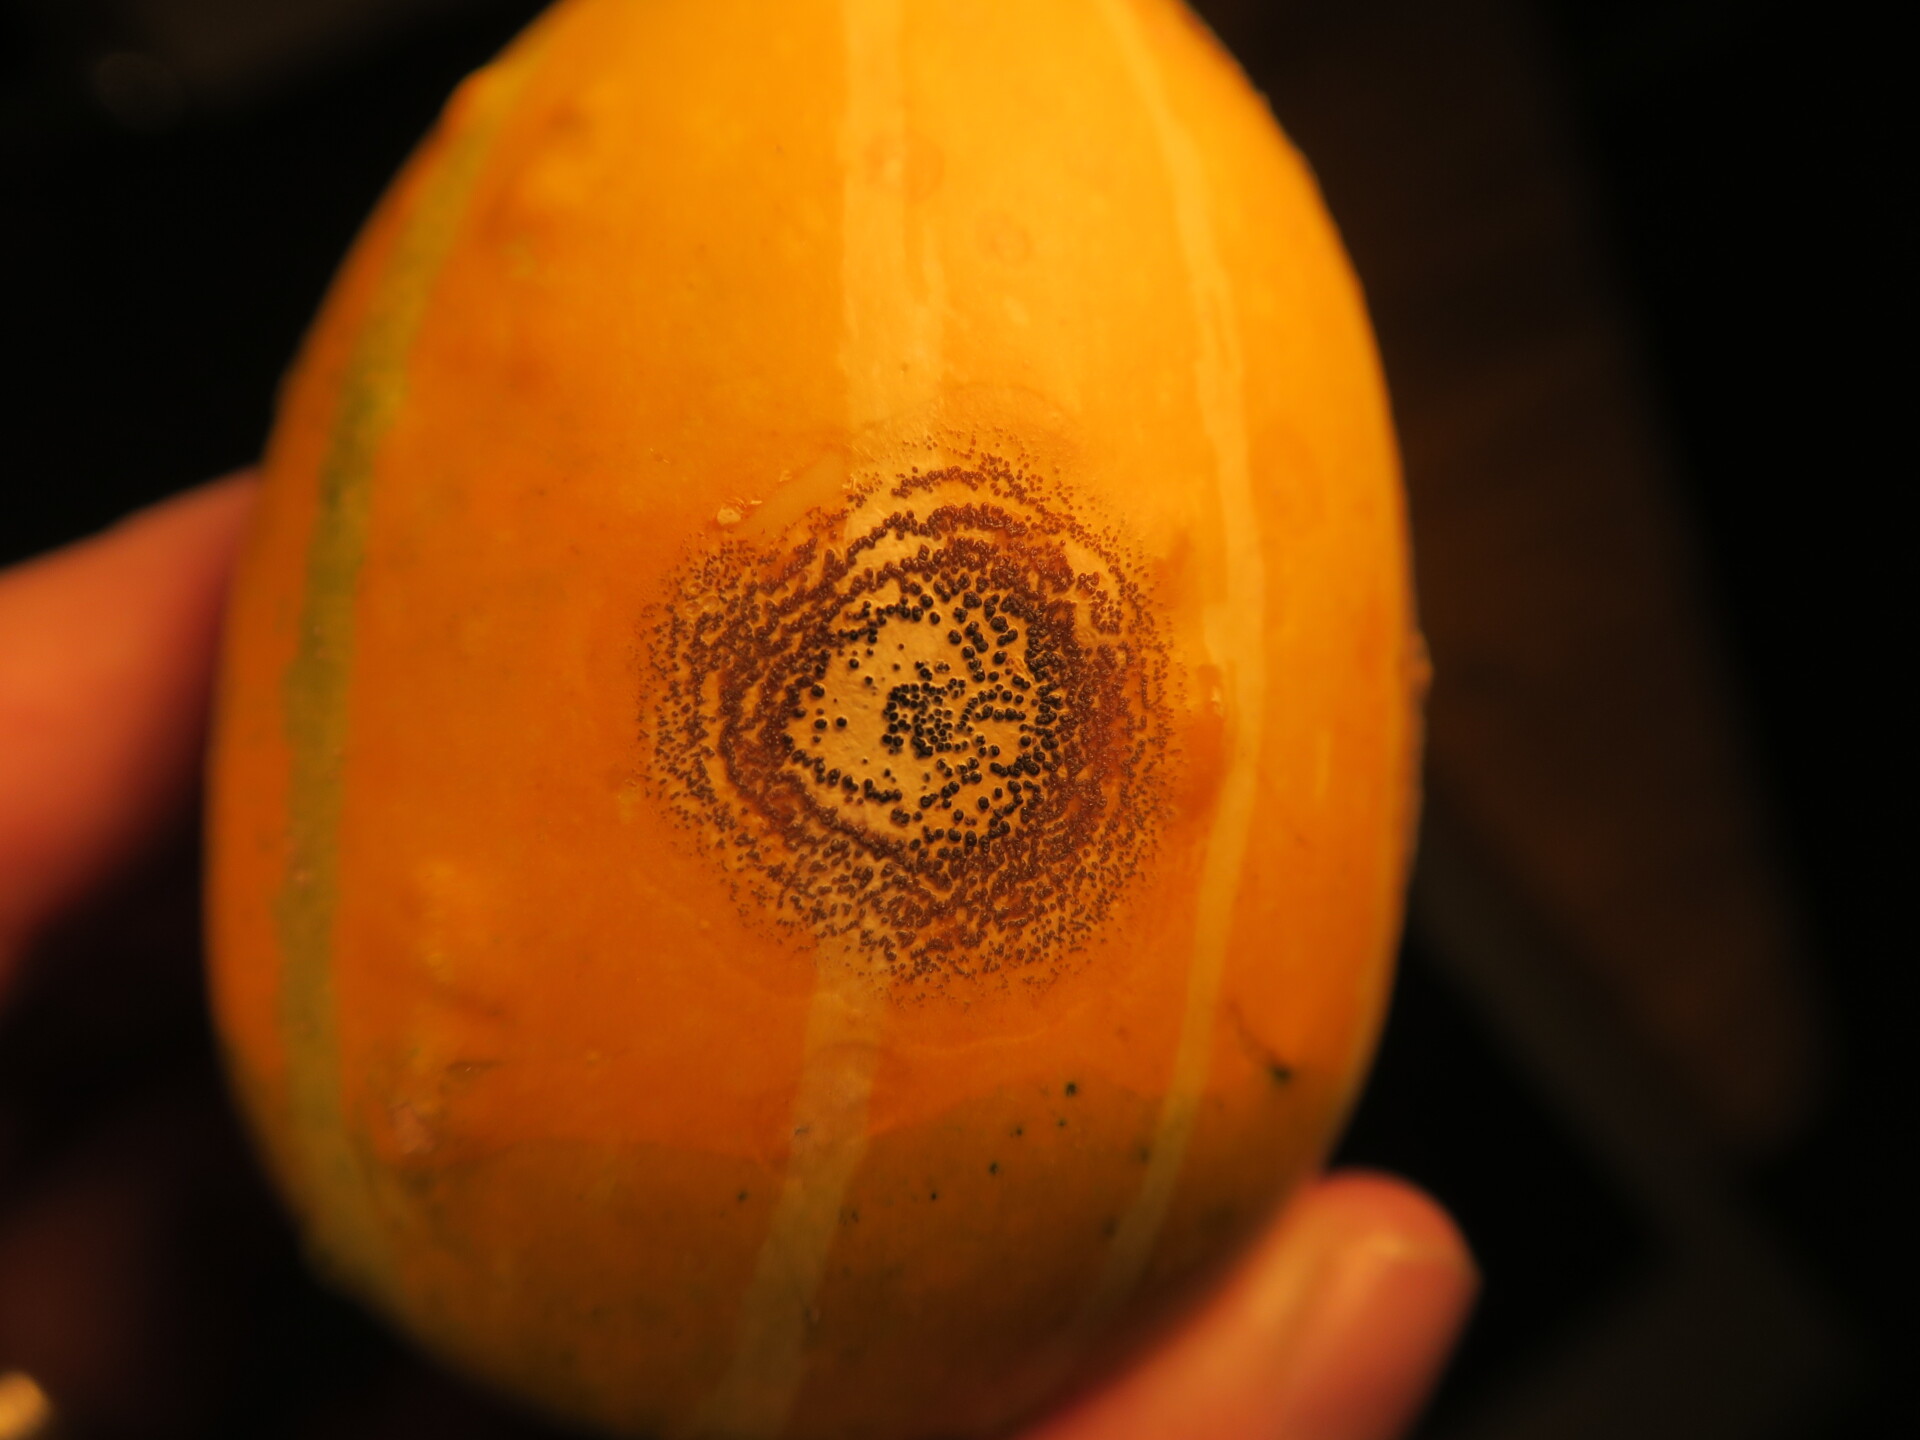 Figure 3. Anthracnose lesion on gourd fruit. Note ring of black fungal structures known as stromata.